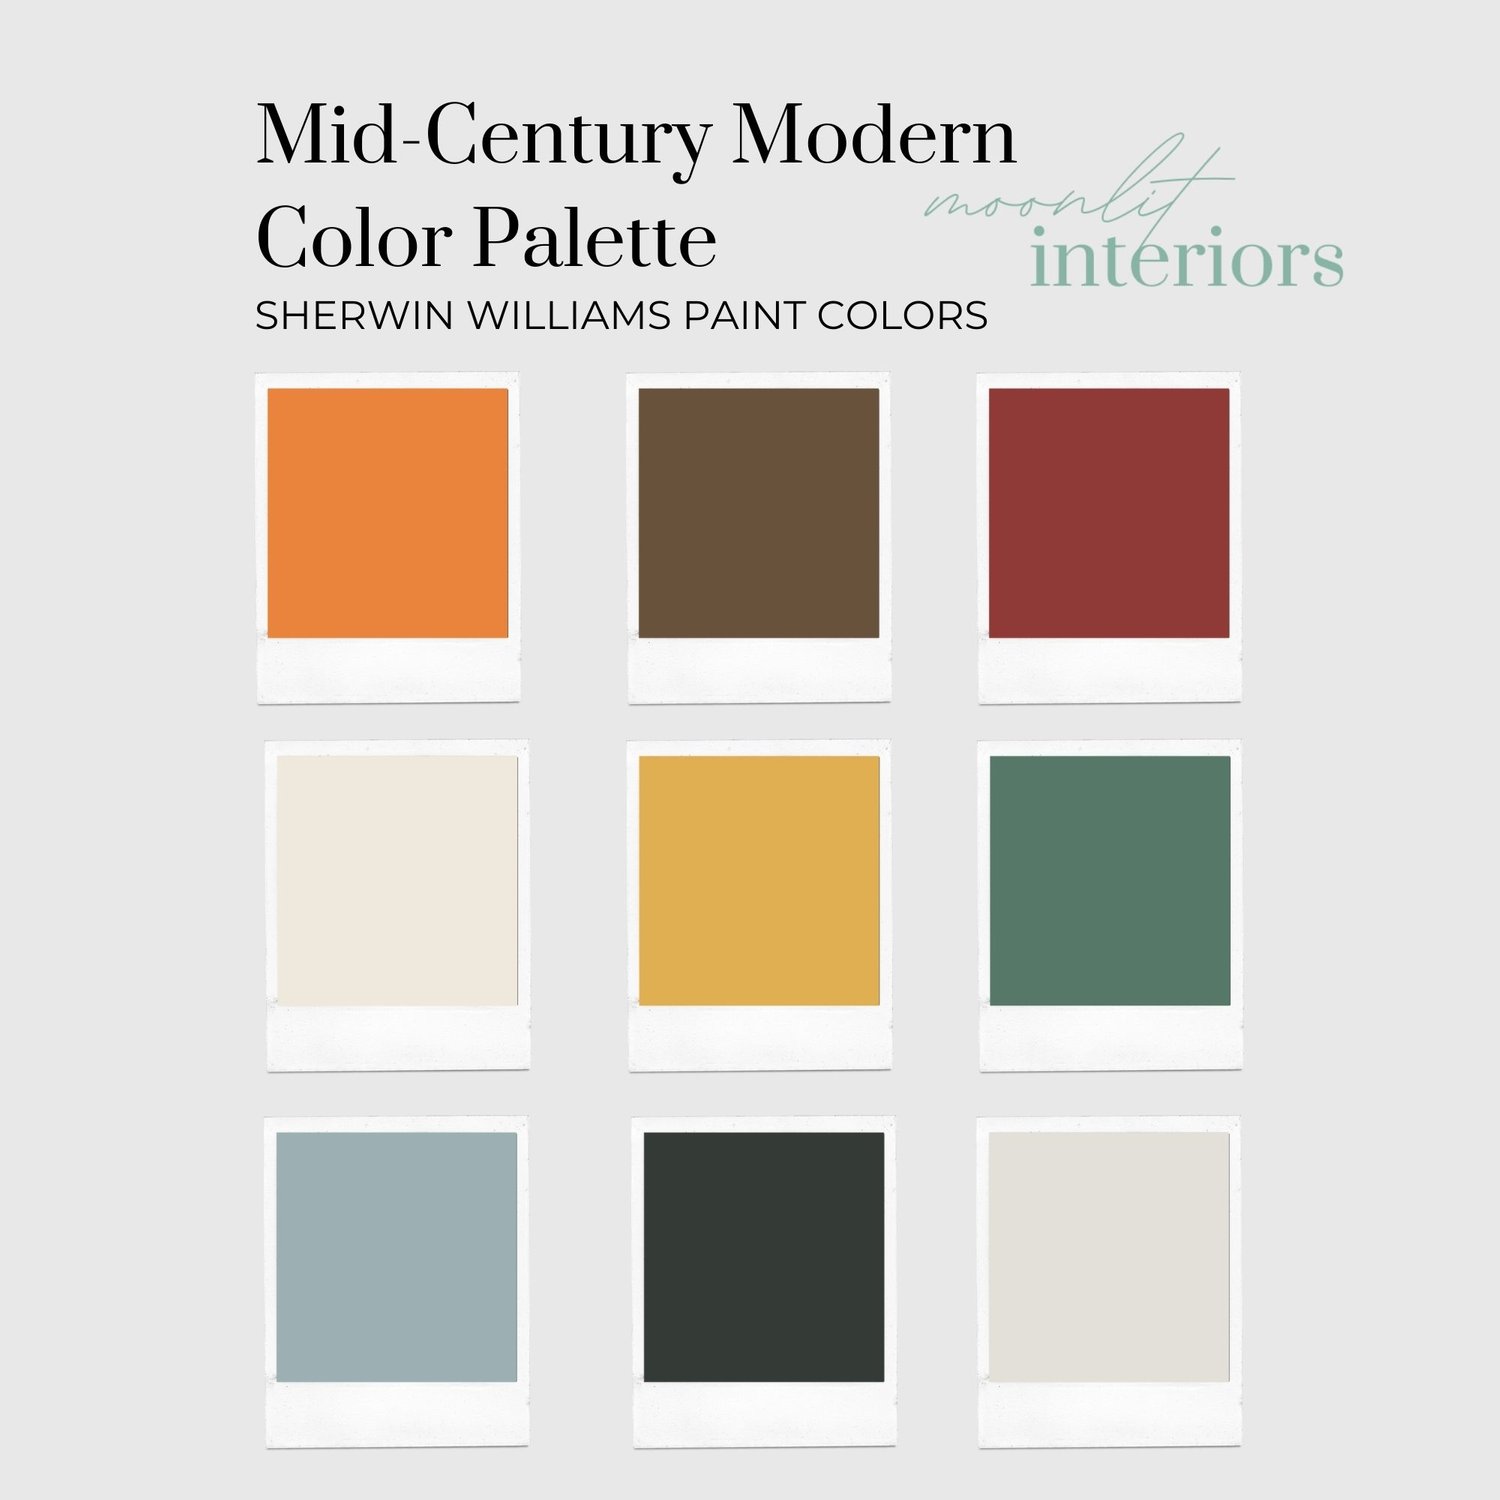 Mid-Century Modern Interior Design Style Pre-Selected Paint Color ...